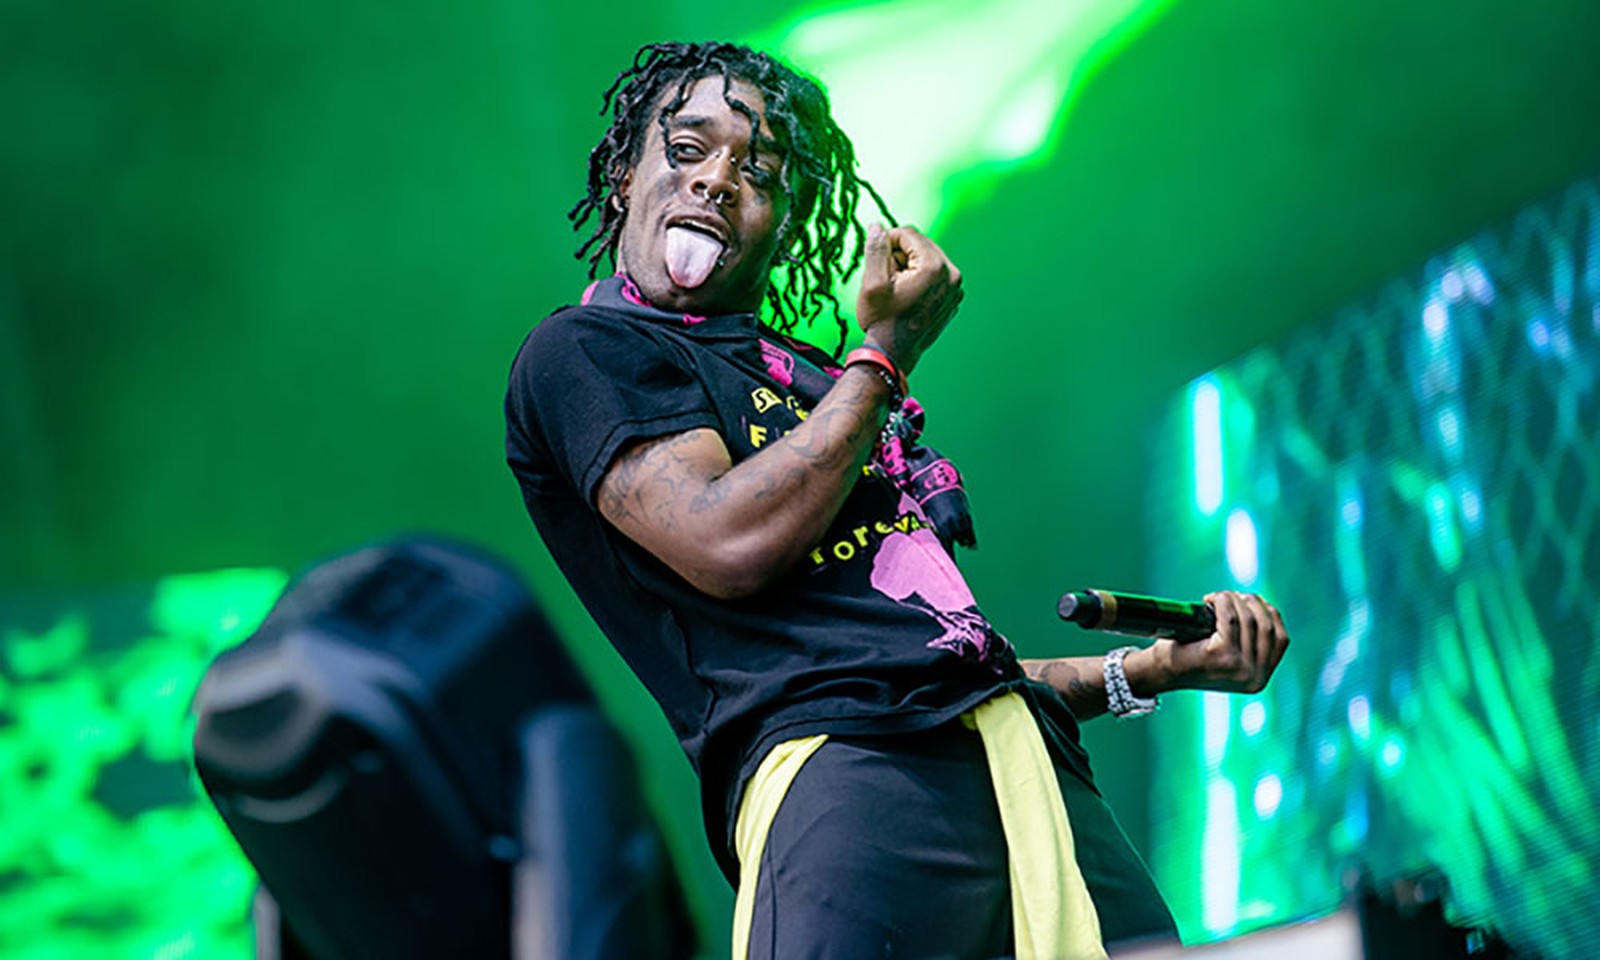 LIL UZI VERT APPEARS AT A CAMBODIAN WEDDING AND GIFT THOUSANDS OF DOLLARS TO THE HAPPY COUPLE